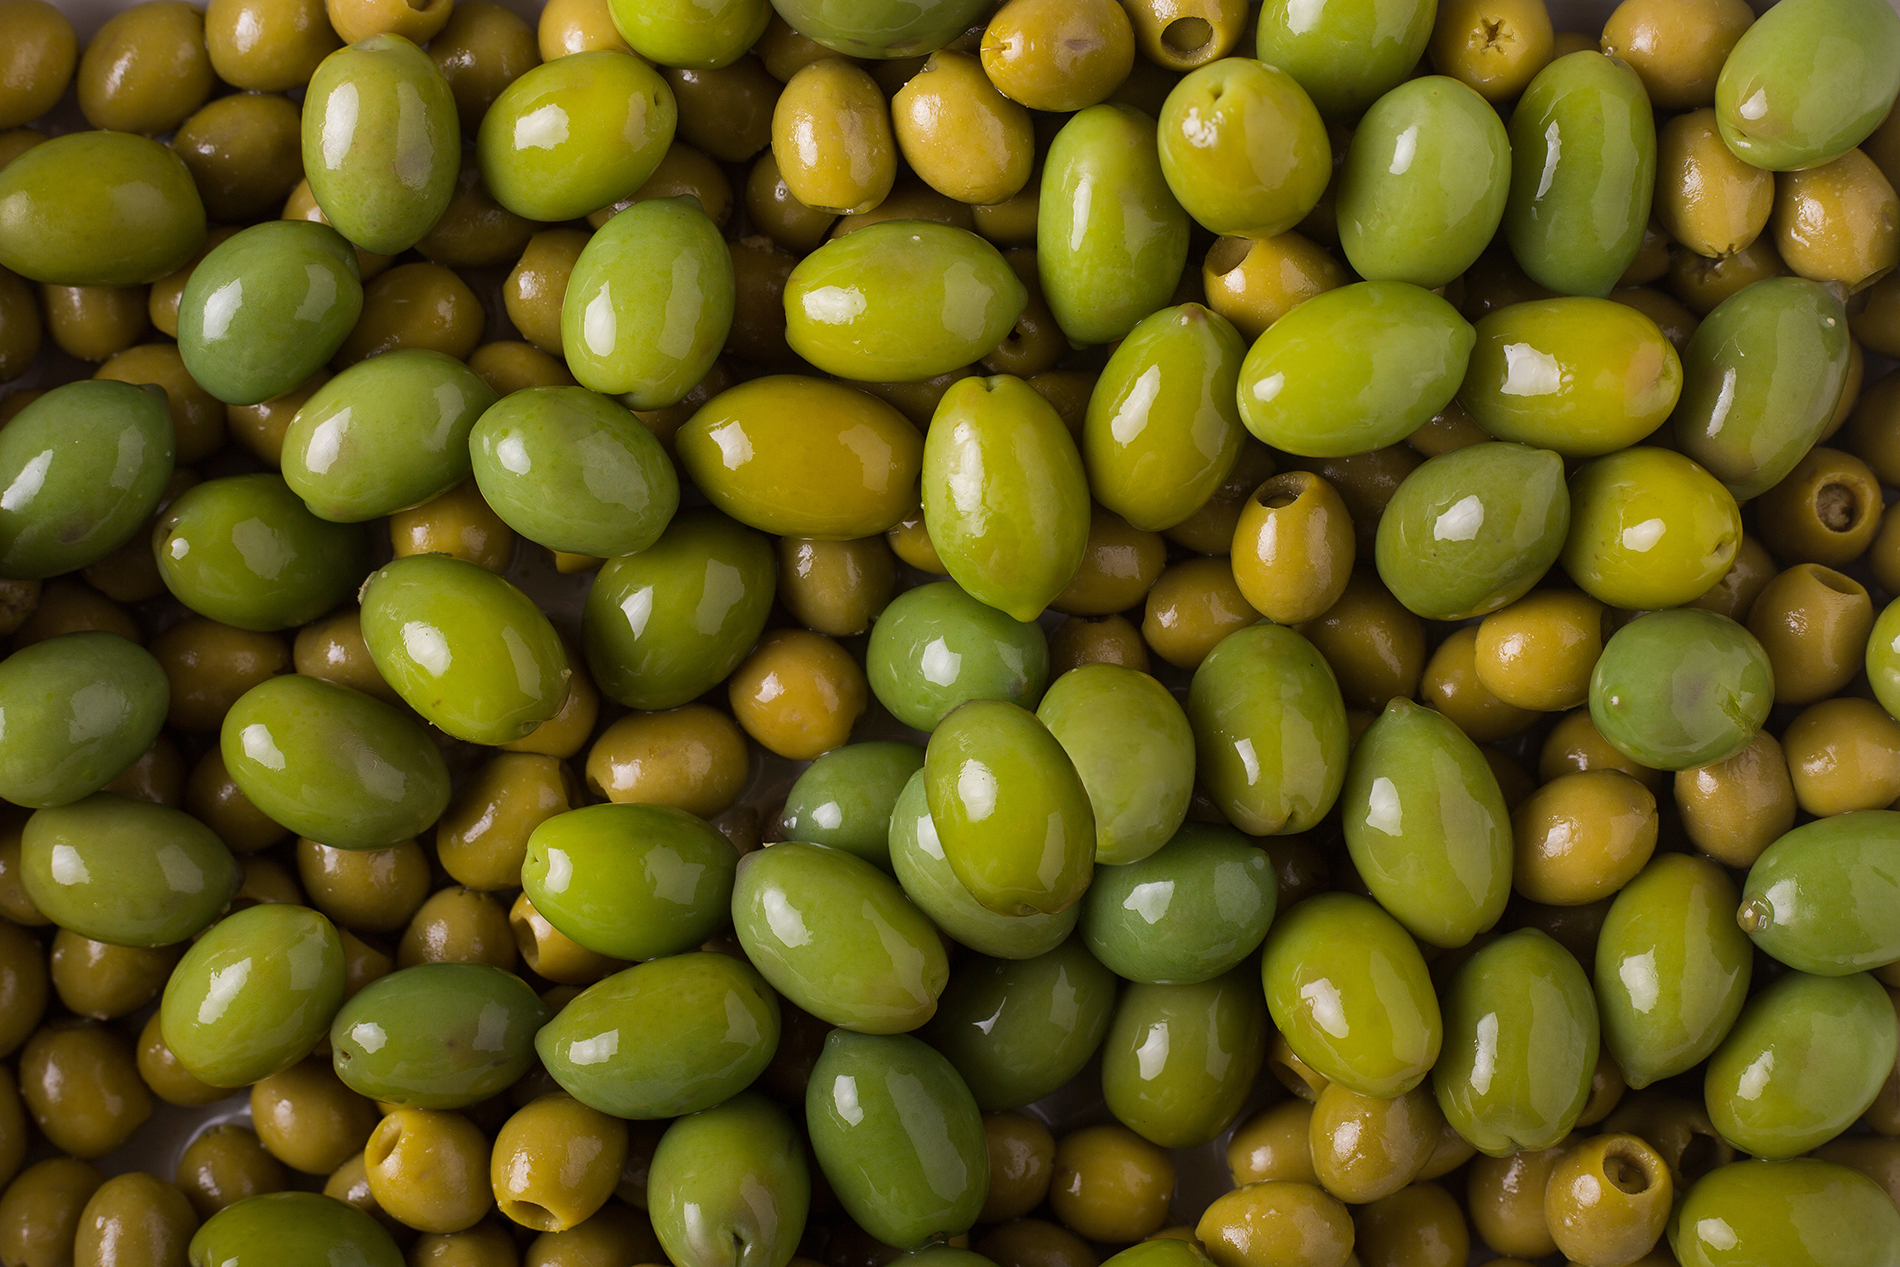 Where to Buy Raw Olives in Bulk Quantities Online